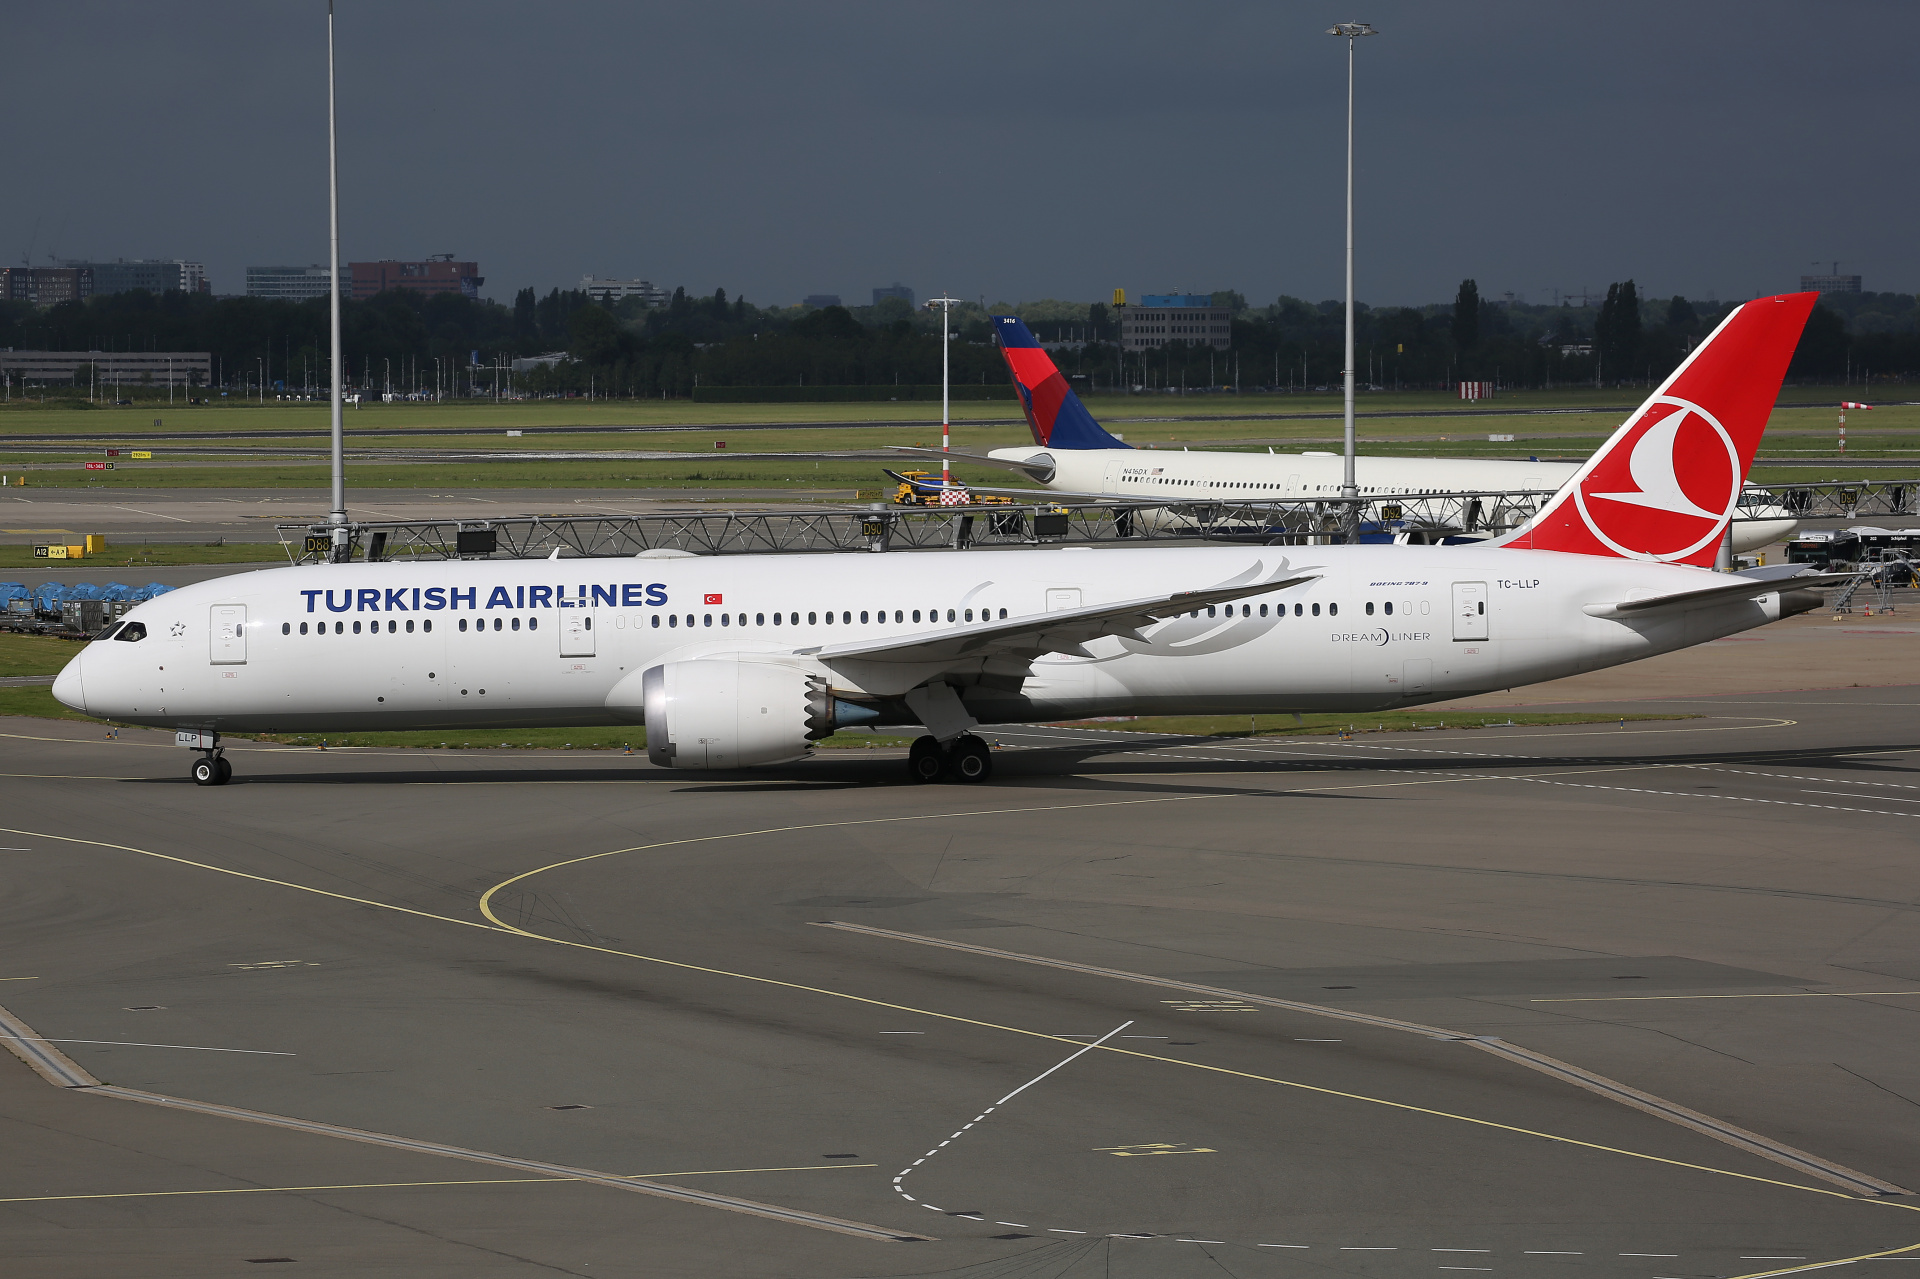 TC-LLP, THY Turkish Airlines (Aircraft » Schiphol Spotting » Boeing 787-9 Dreamliner)